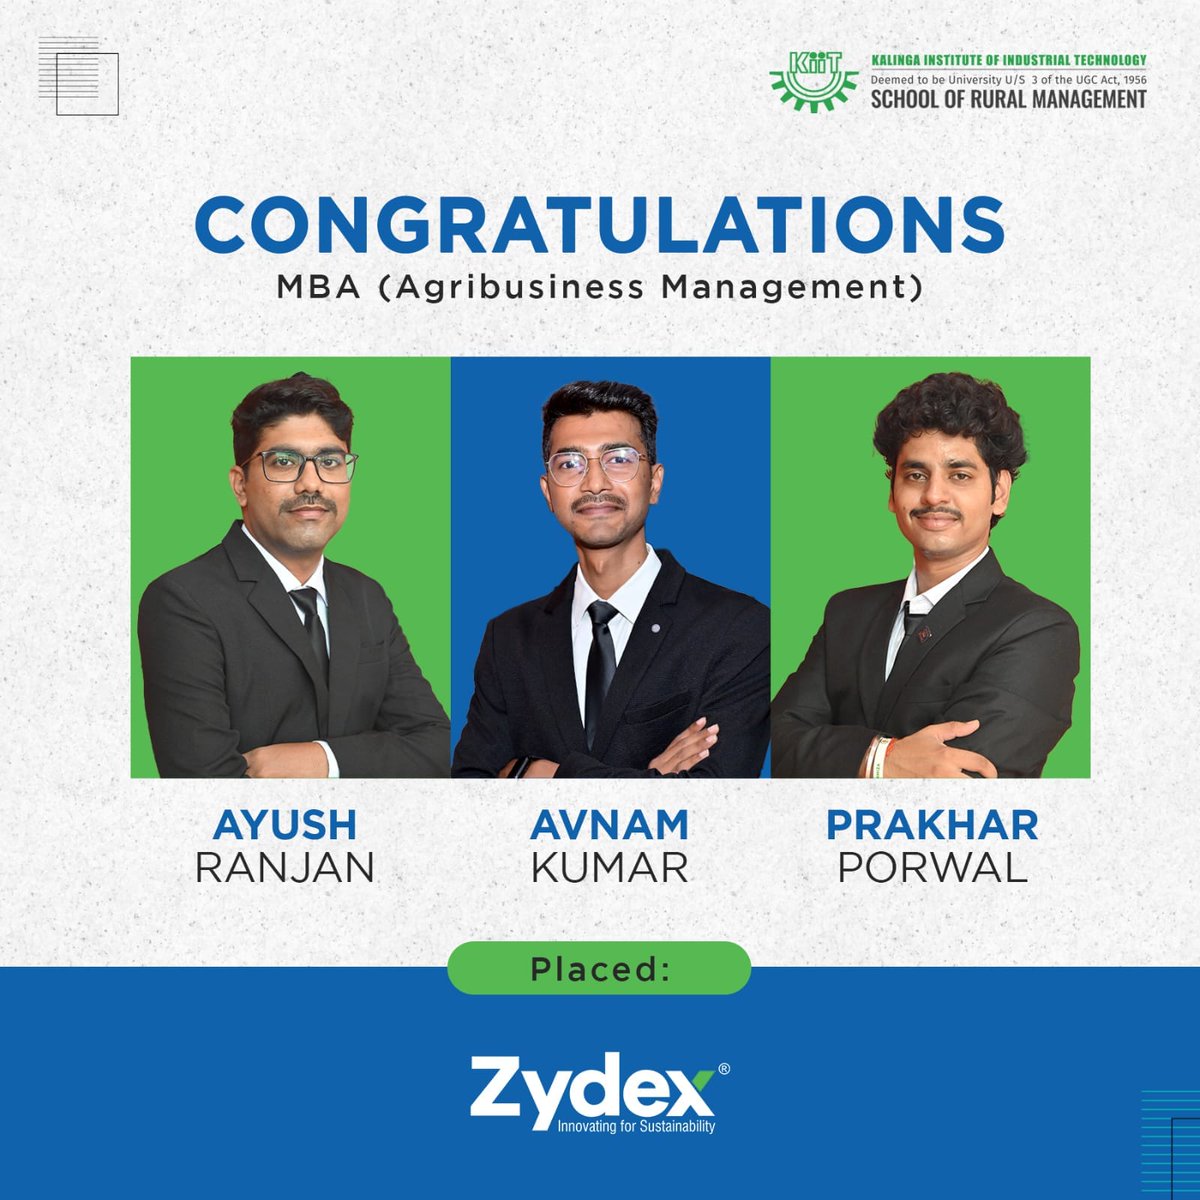 Congratulations to our MBA (Agribusiness Management) students for their placement at Zydex #ksrmbbsr #AgriBusinessManagement #MBA #placement